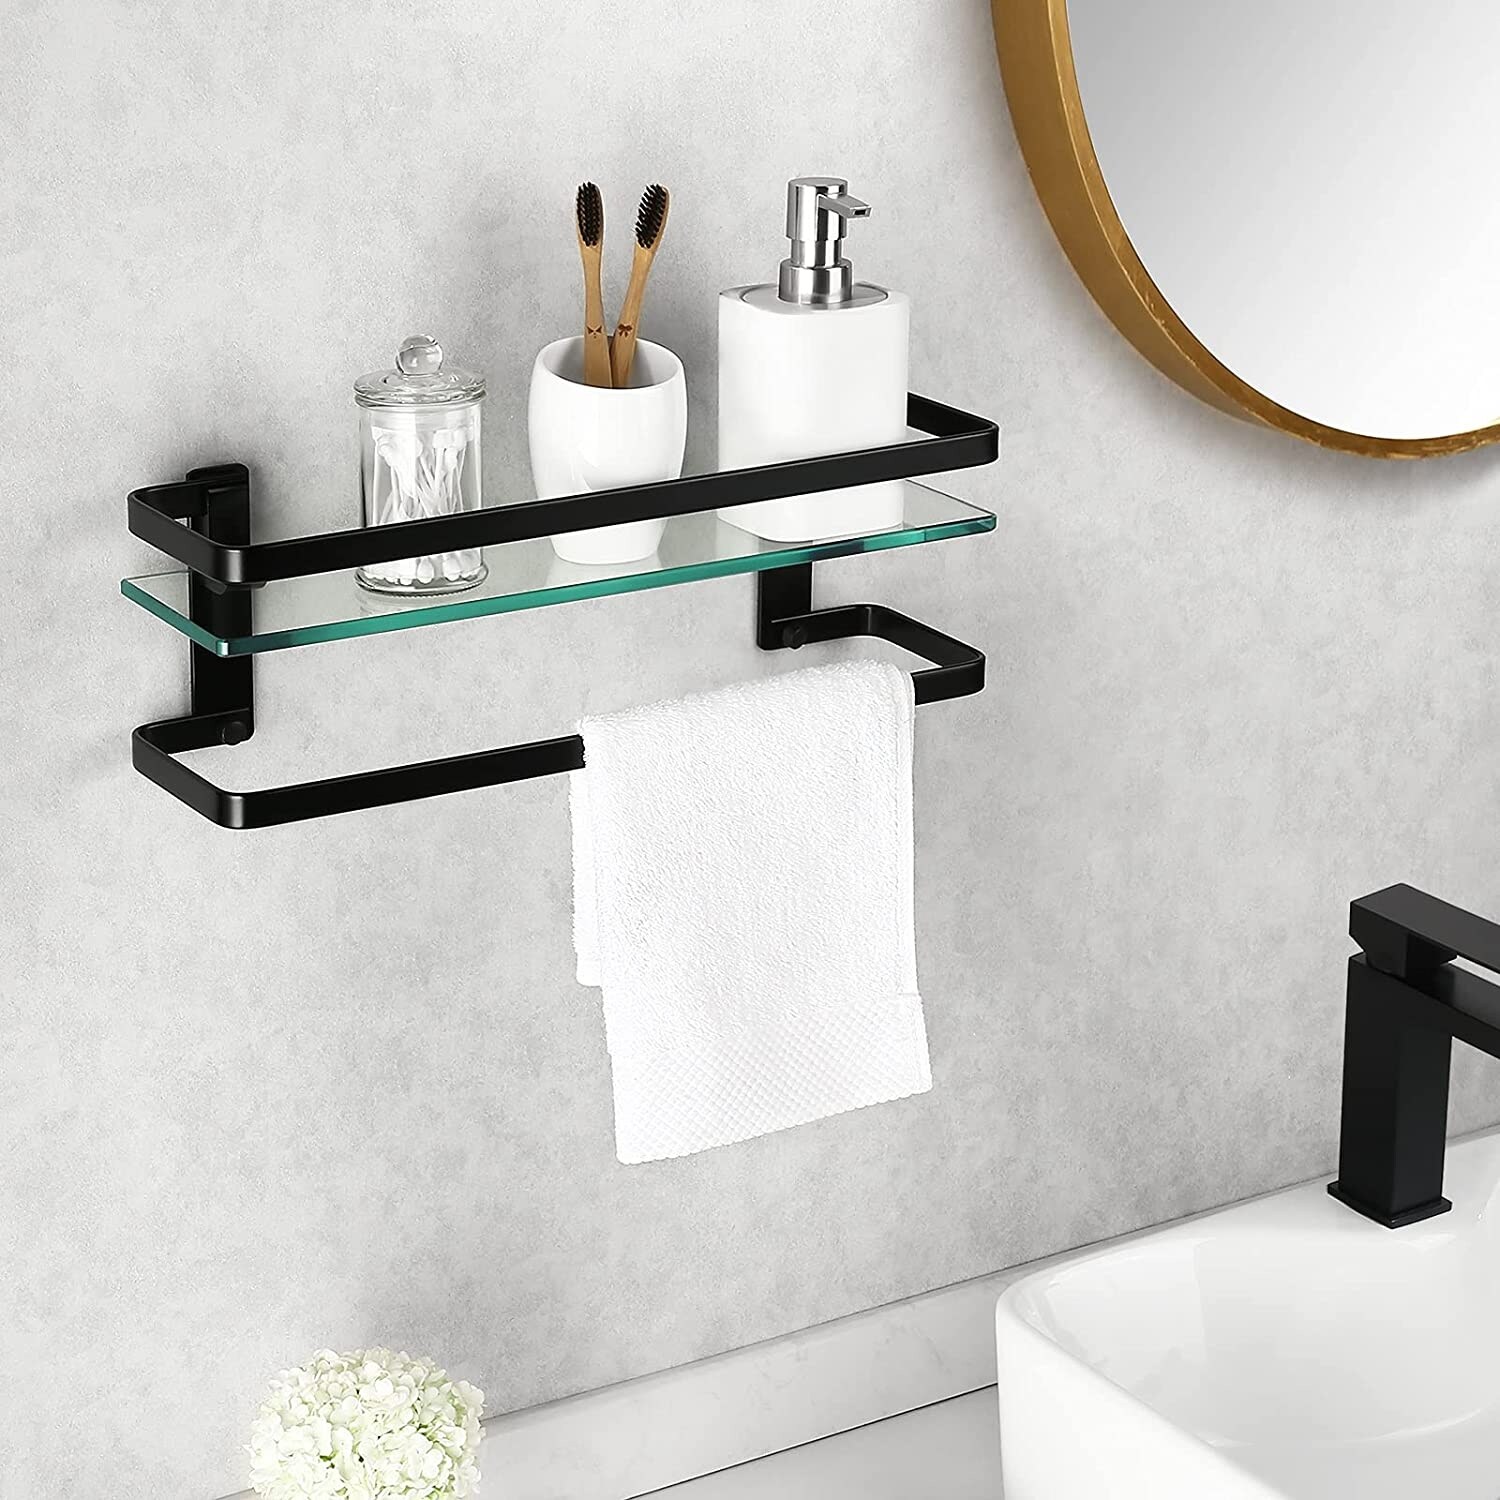 https://ak1.ostkcdn.com/images/products/is/images/direct/7aff53046f506342d204686e41ffe24afe620702/Wall-Mount-Glass-Floating-Shelf-With-Towel-Bar.jpg